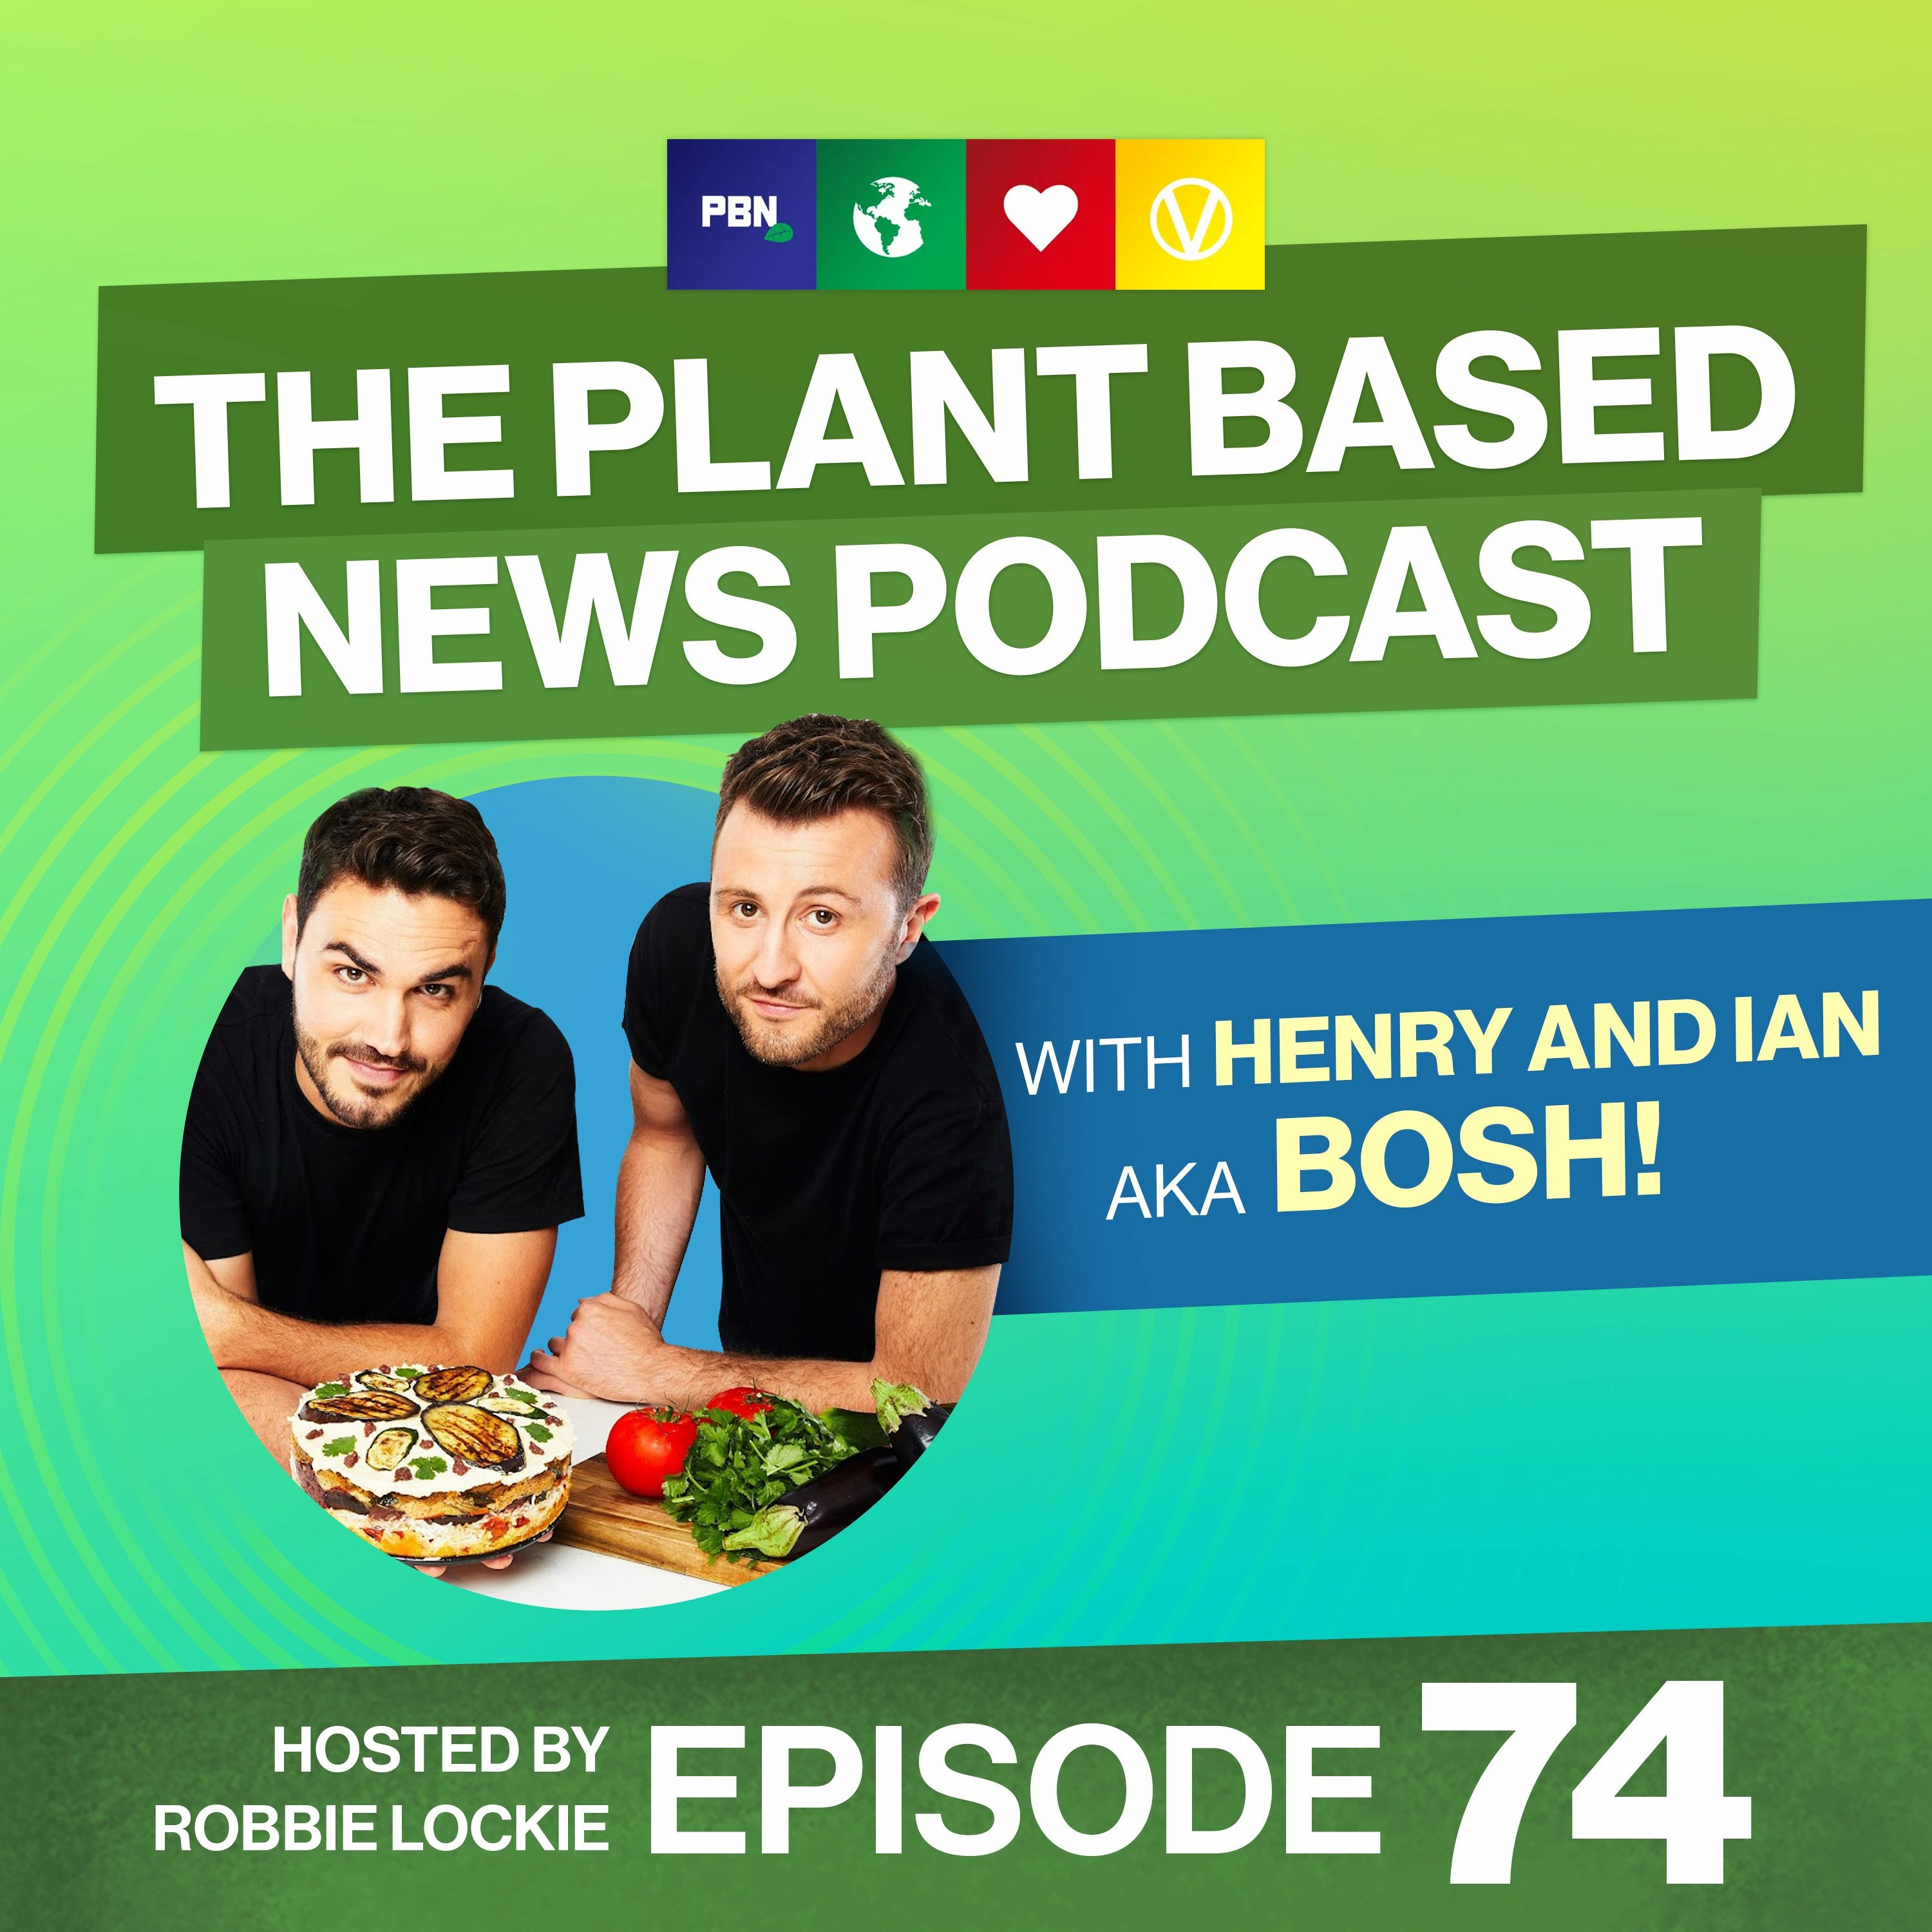 ’Making Veganism Mainstream’ Interview with Henry Frith & Ian Theasby from BOSH! / Episode 74